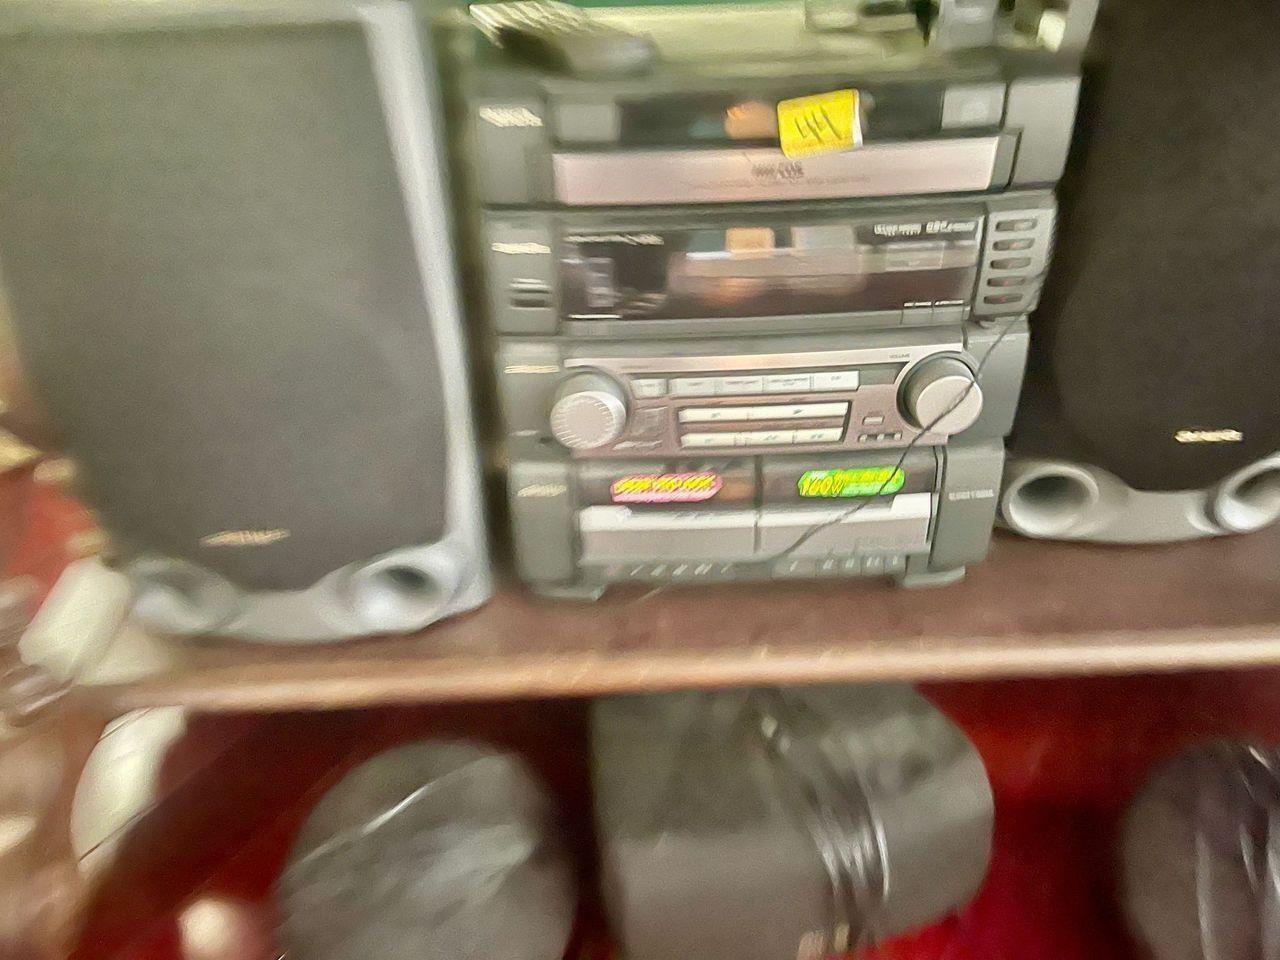 AIWA speakers and sound system untested